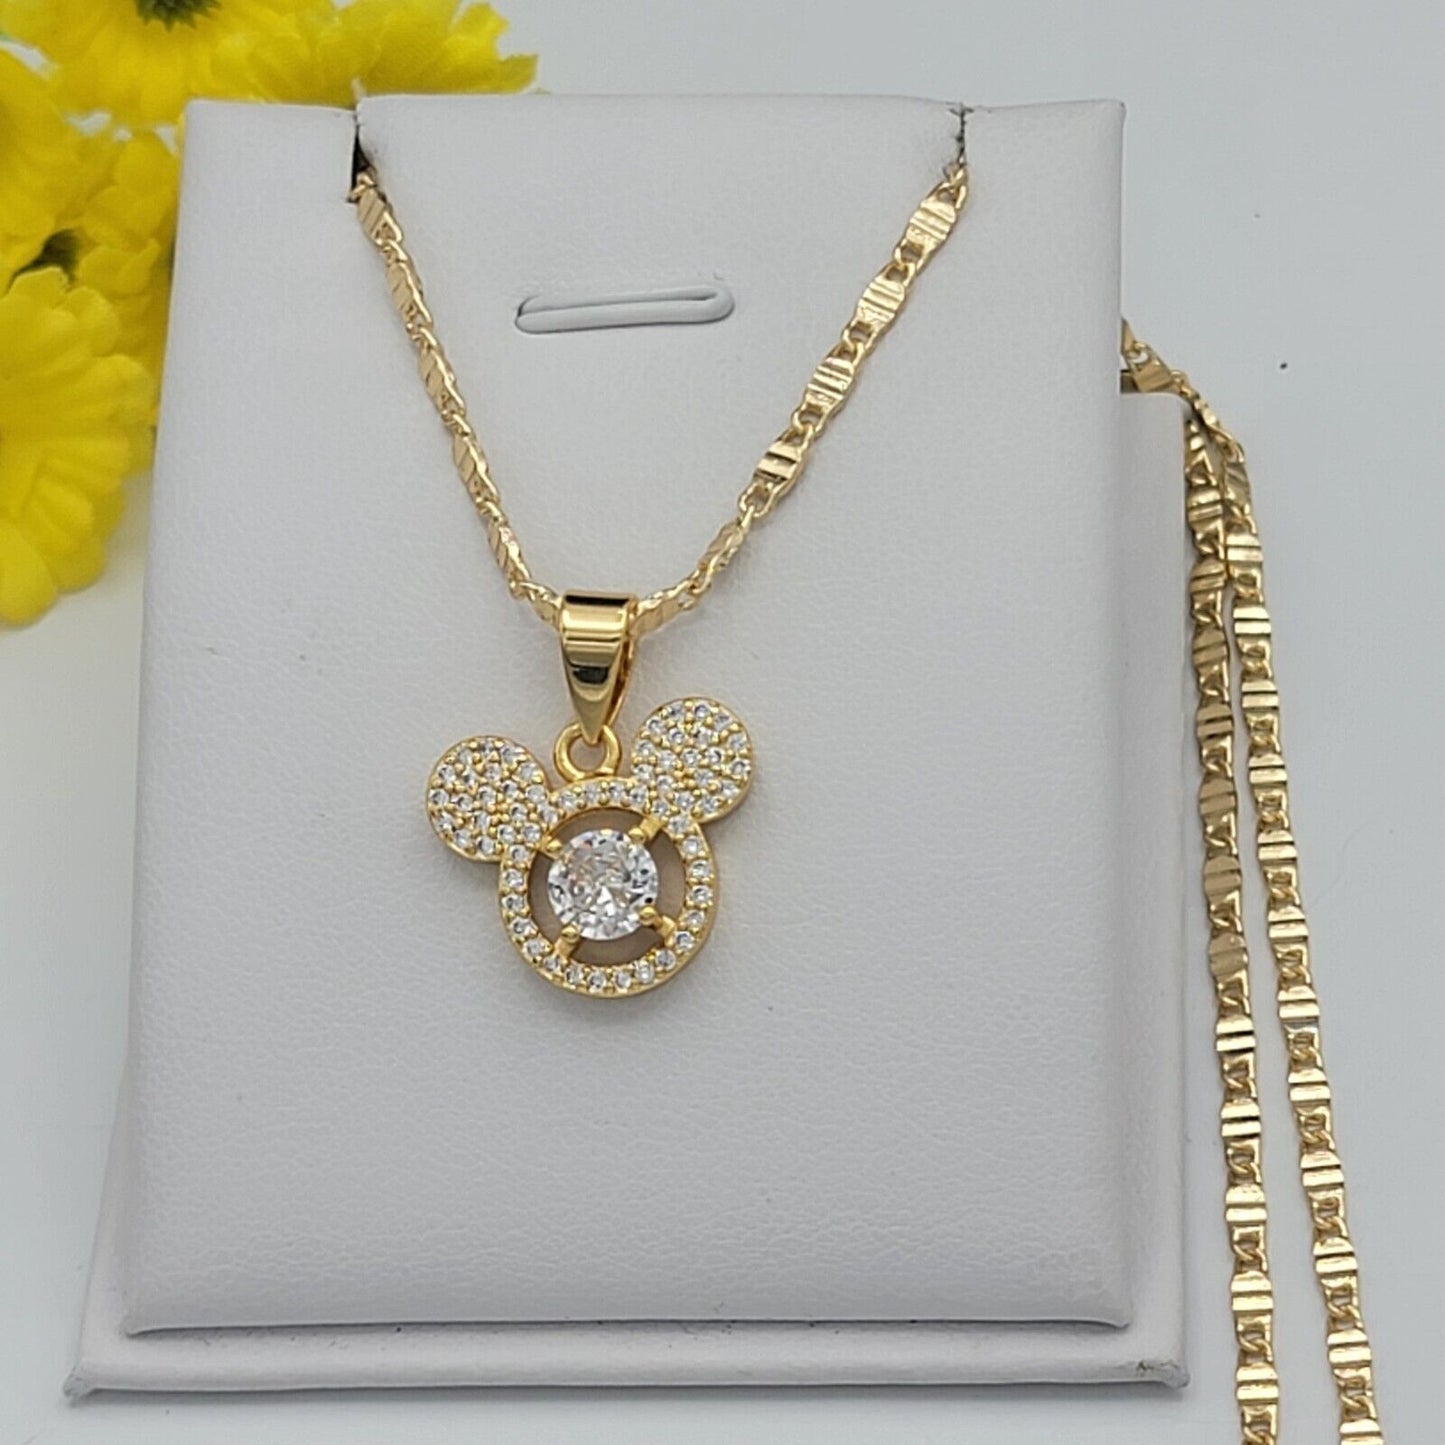 Necklaces - 14K Gold Plated. Cute Mouse Silhouette Pendant & Chain.